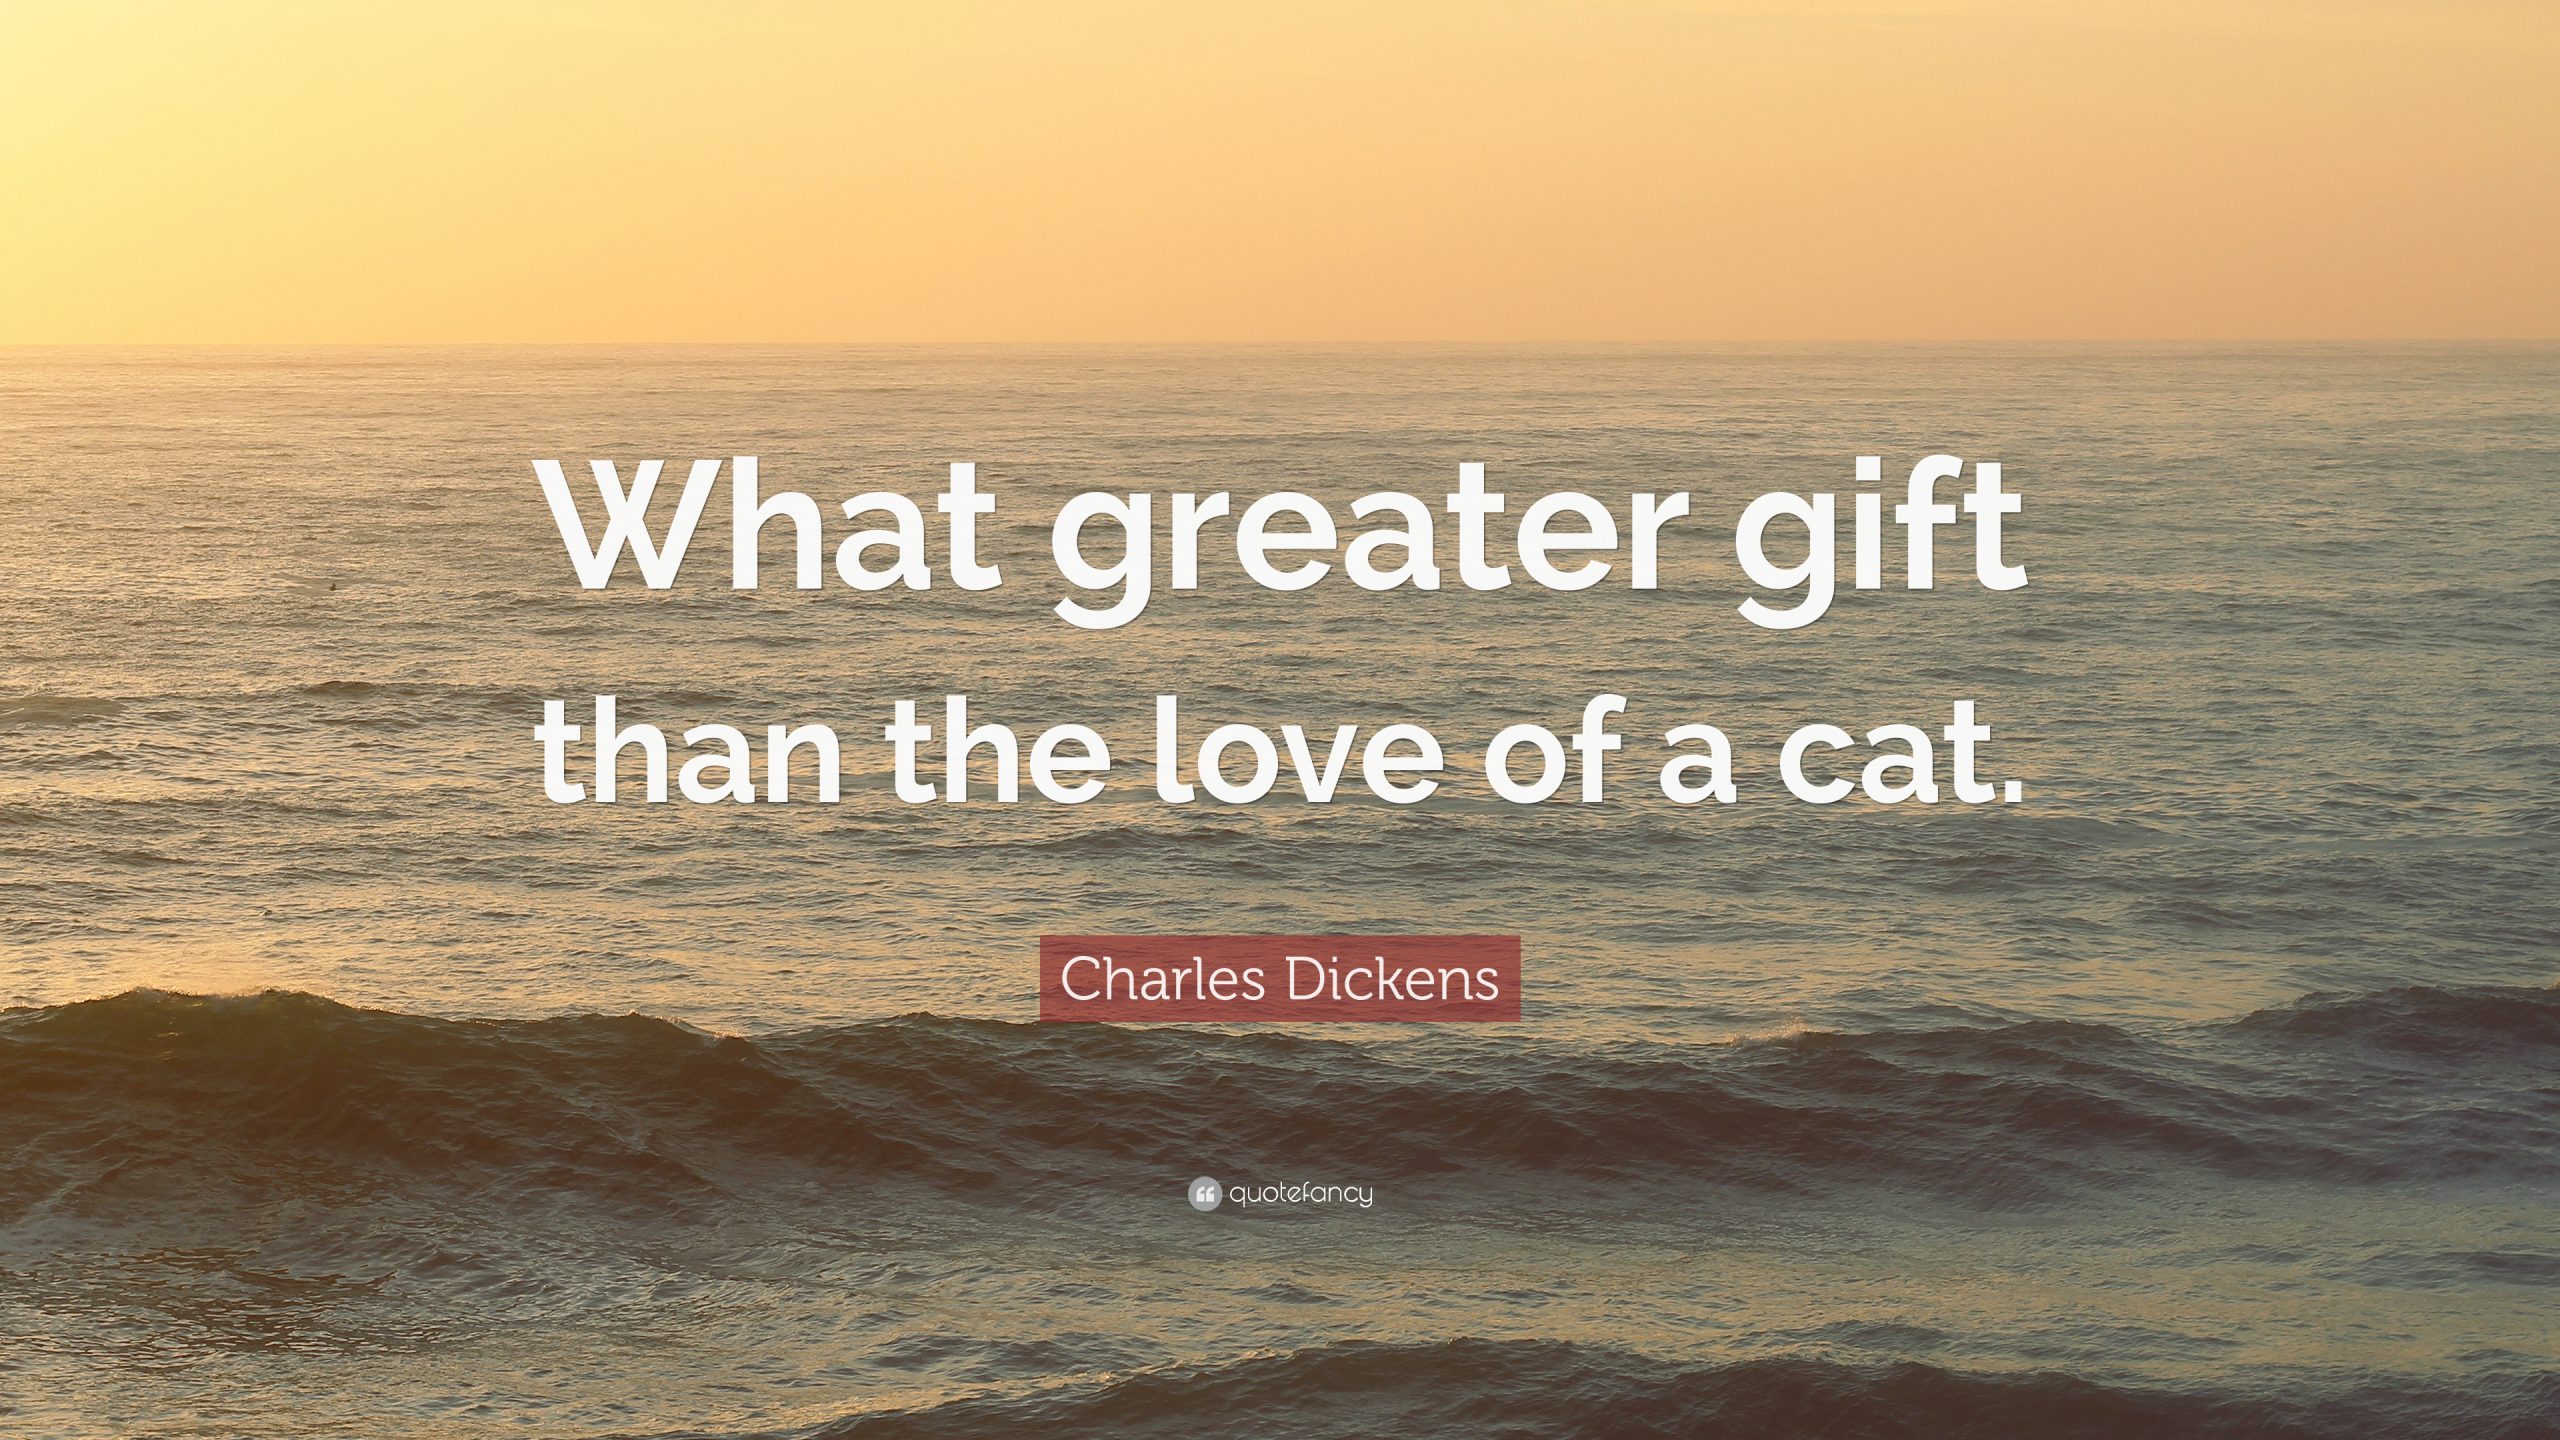 Charles Dickens Quote: What greater gift than the love of ...